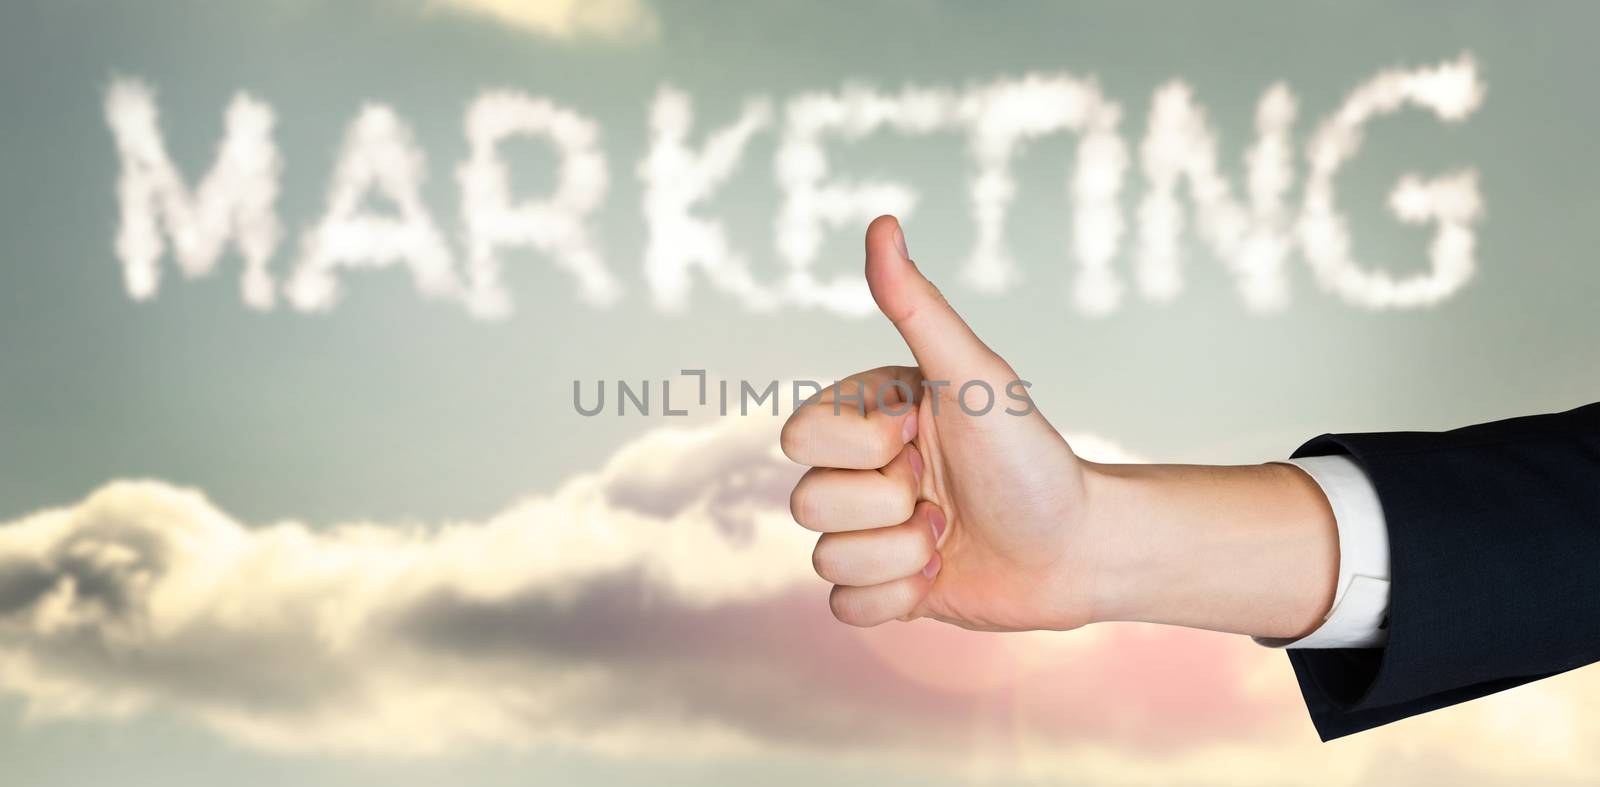 Hand showing thumbs up against clouds spelling out marketing